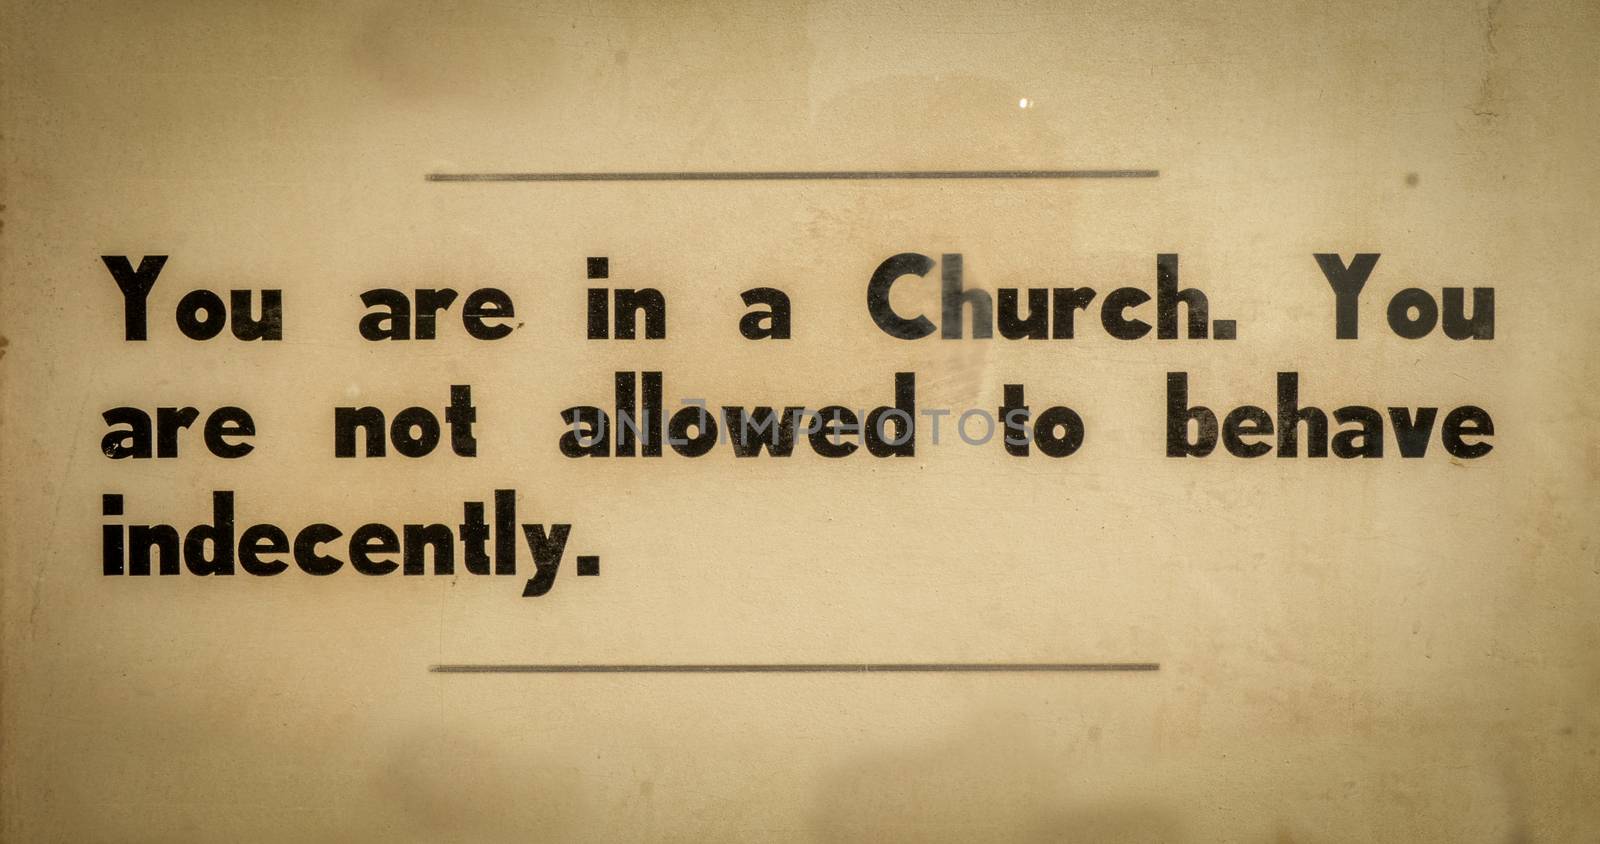 Old VIntage Sign In A Church Asking Visitors To Behave Respectfully